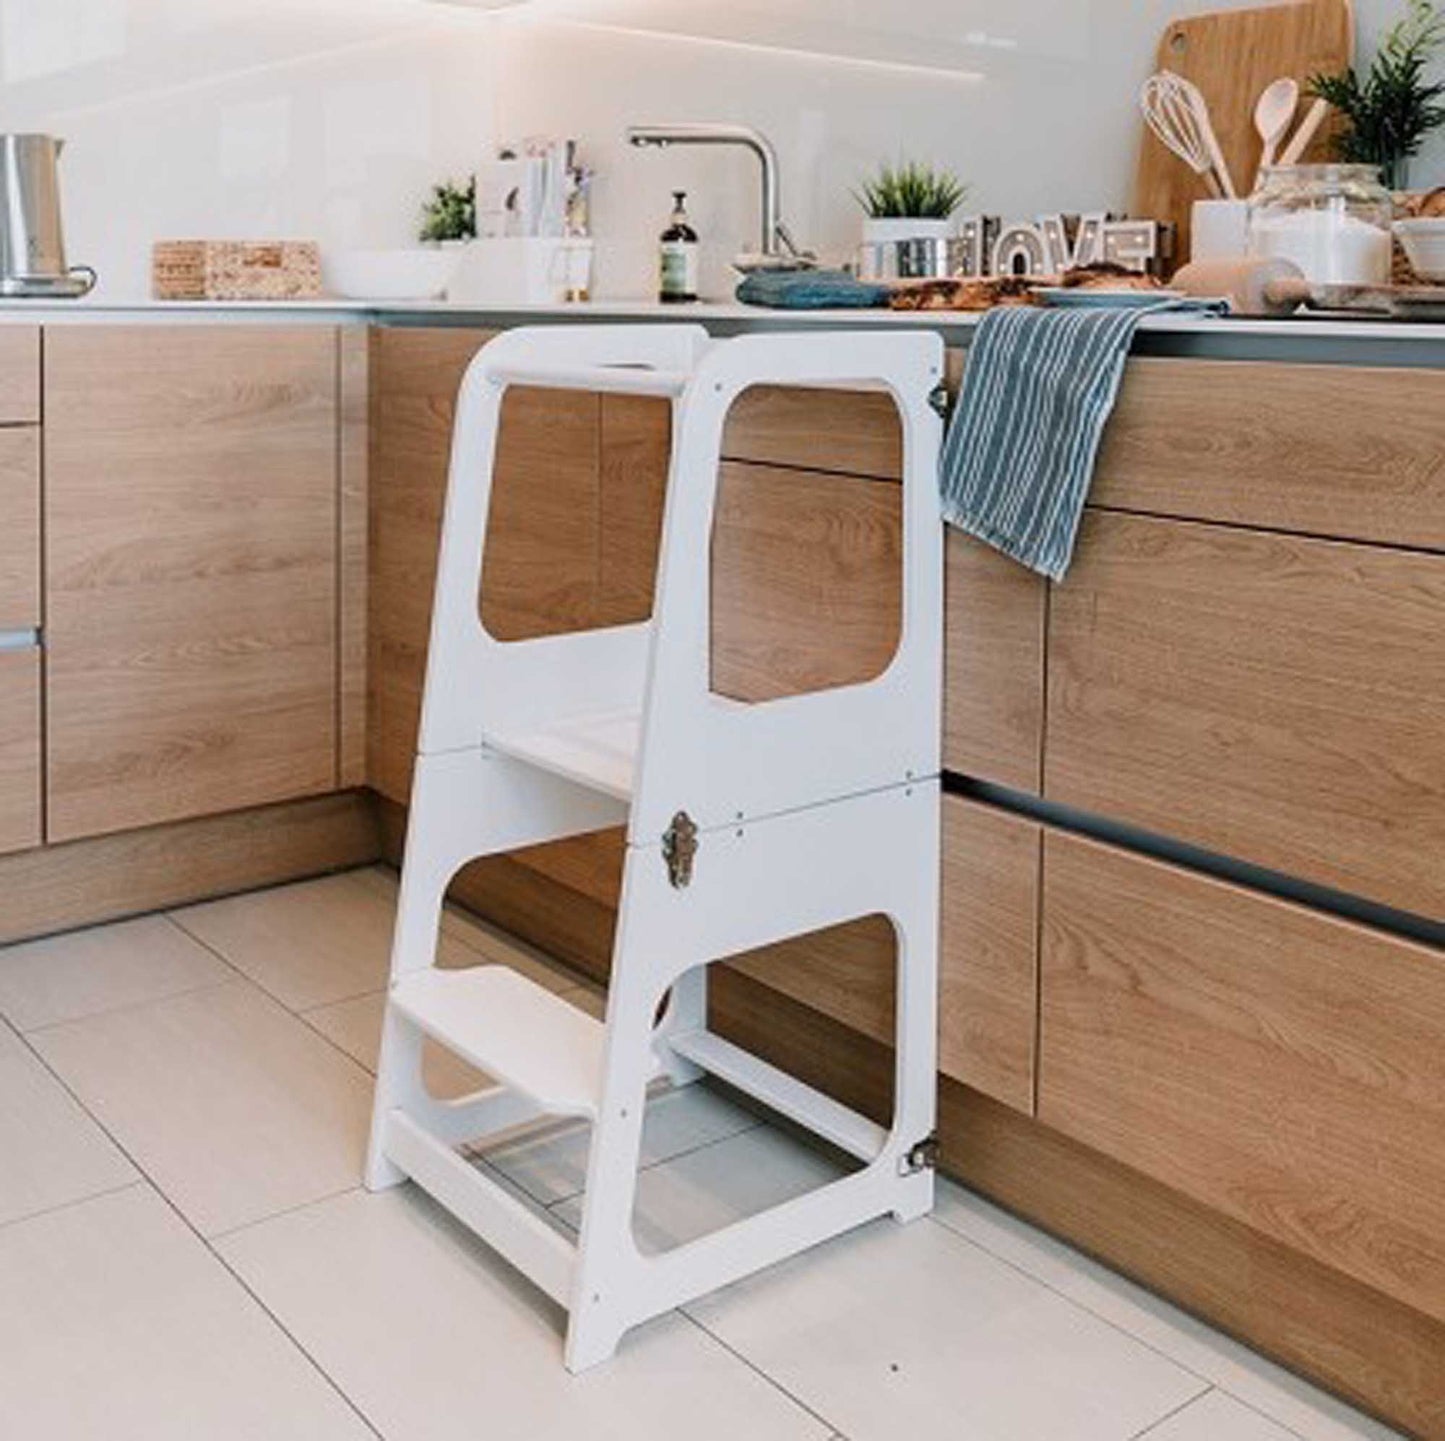 A Sweet Home From Wood 2-in-1 transformable kitchen tower - table and chair in a kitchen.